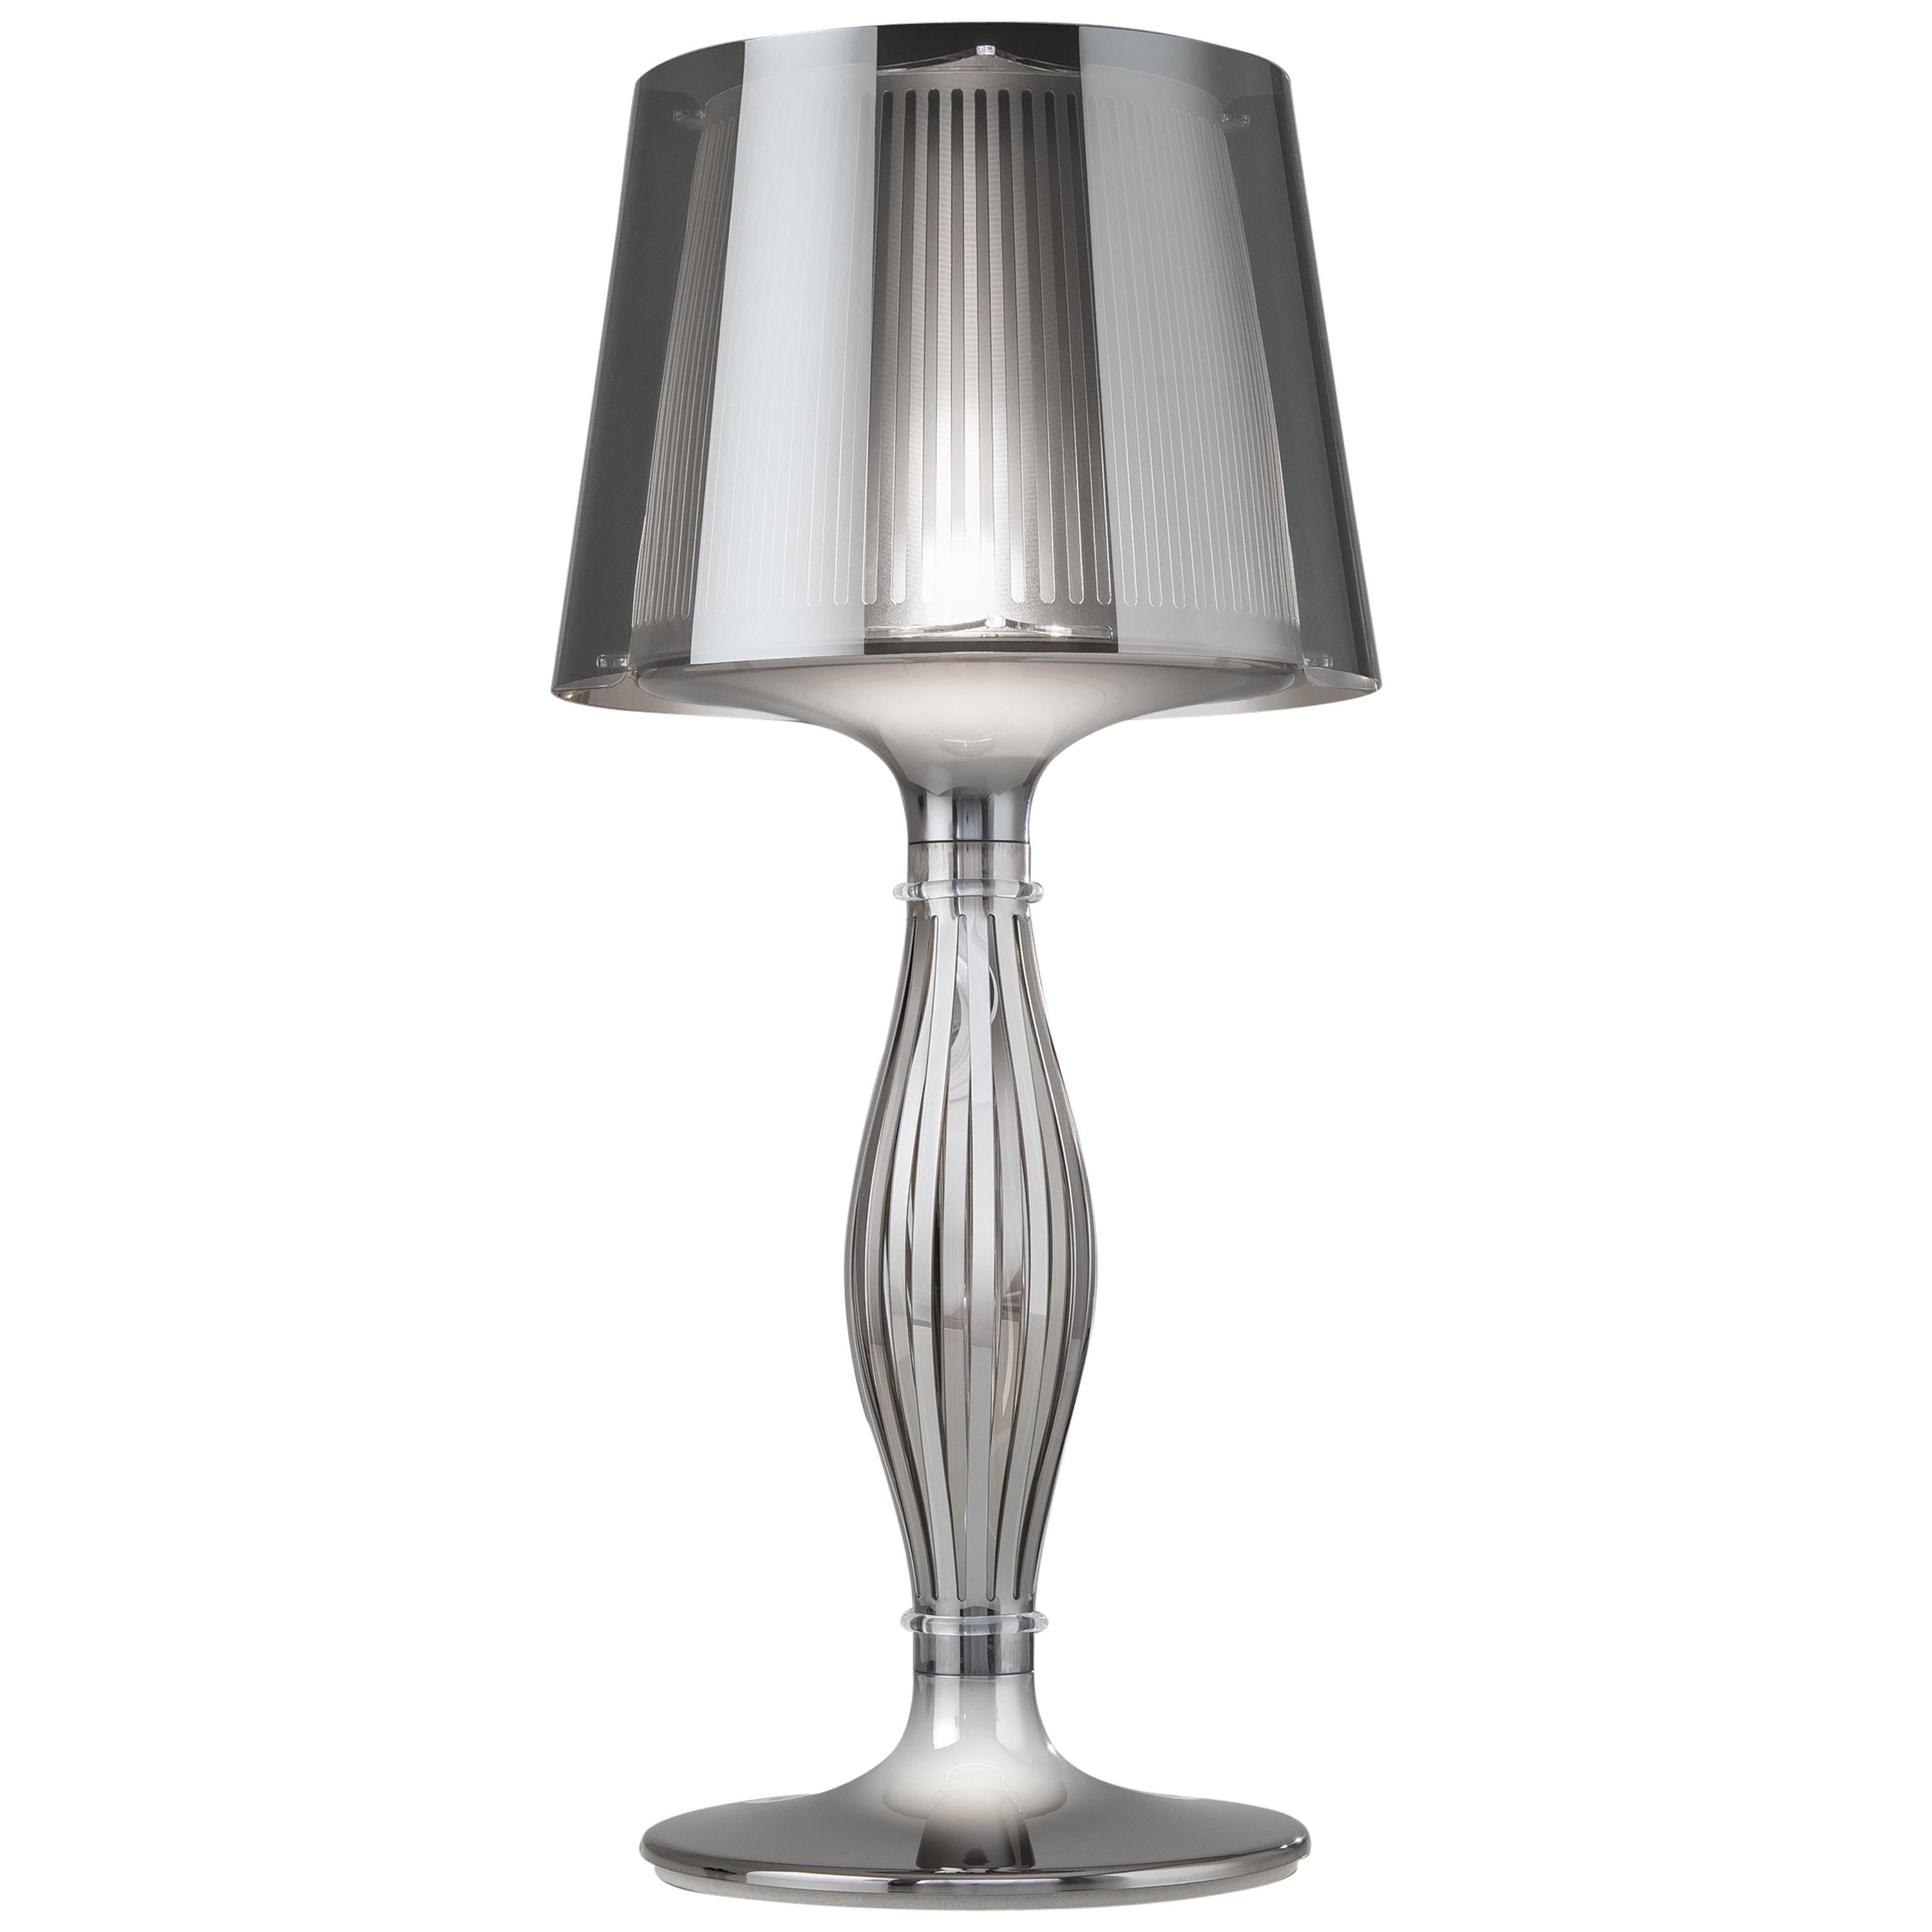 SLAMP Liza Table Light in Pewter by Elisa Giovannoni